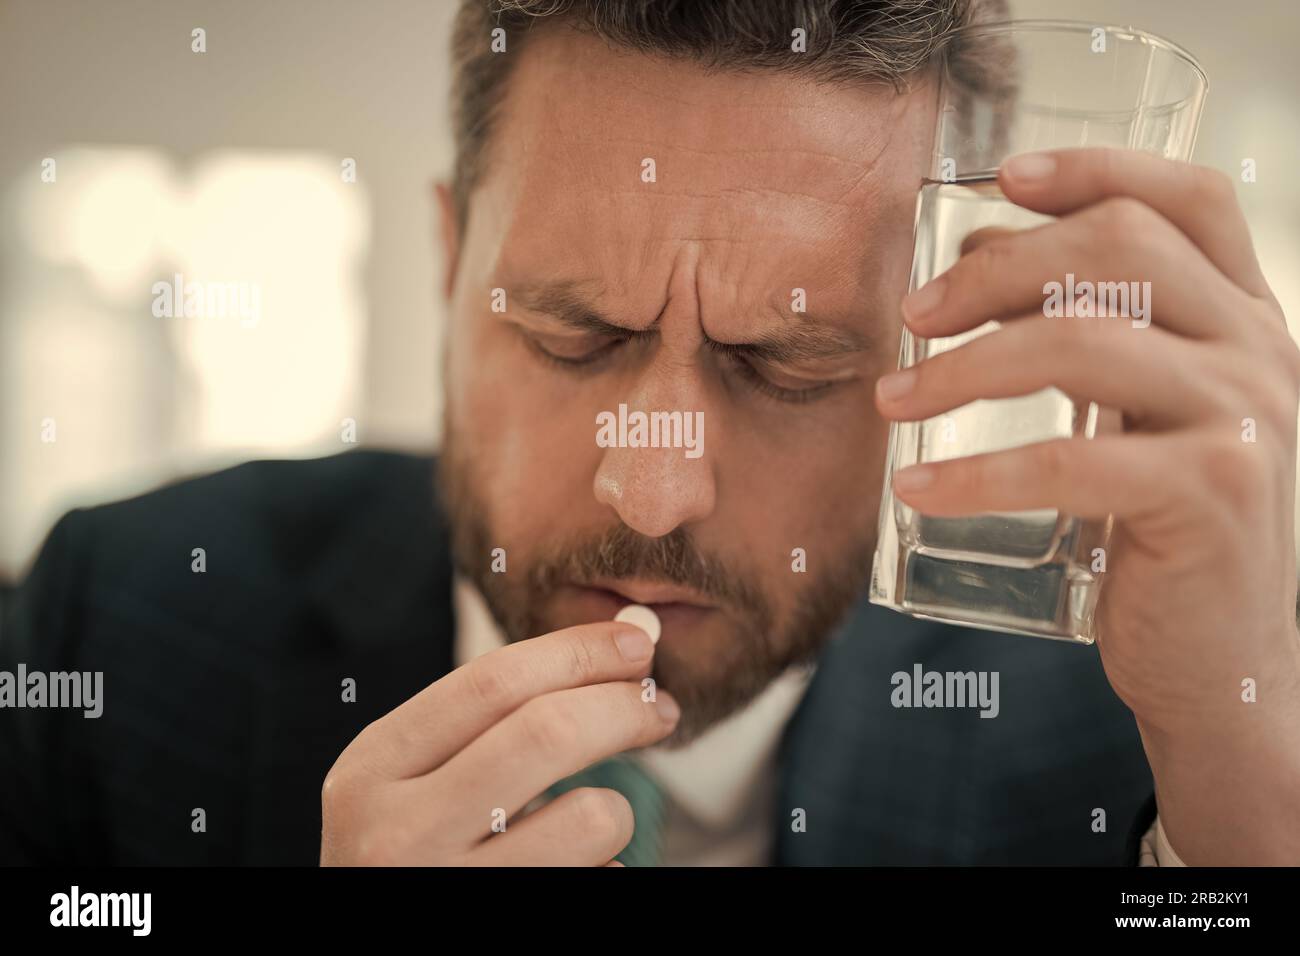 Tired man feel pain holding glasses rubbing dry irritated eyes fatigued from computer work, stressed man suffer from headache. Man taking a Medicine p Stock Photo